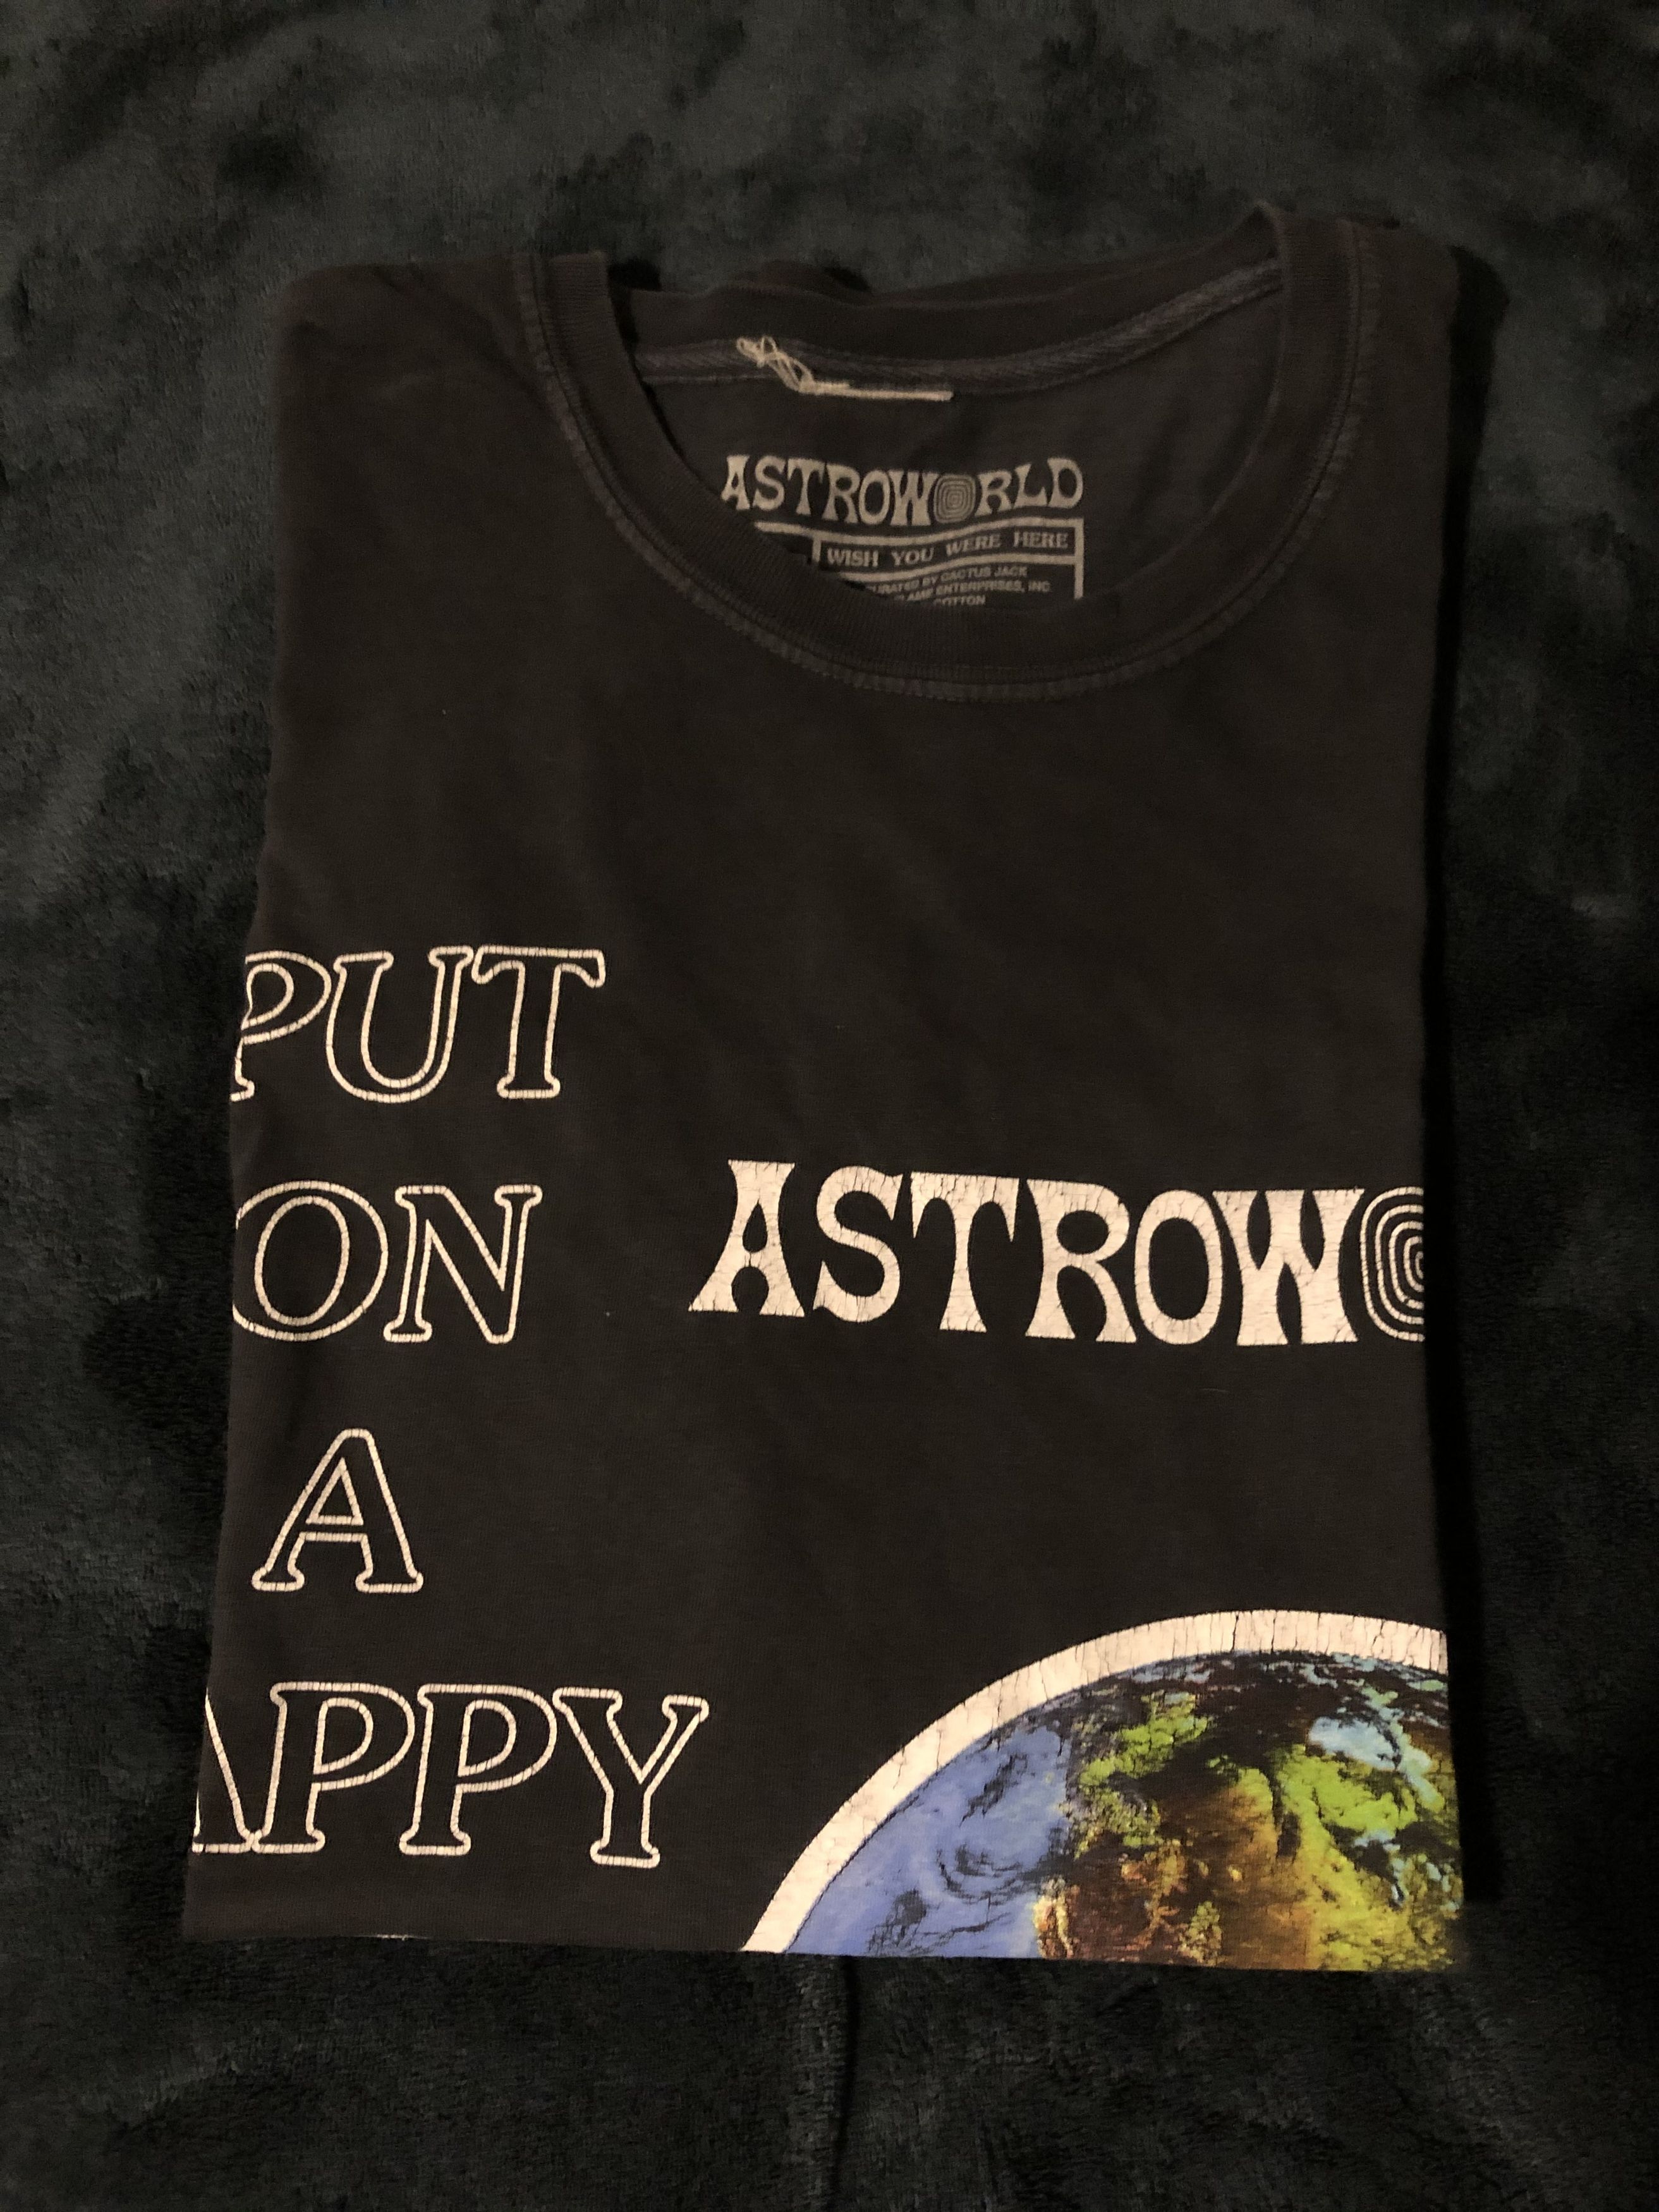 Travis Scott Astroworld Put On A Happy Face Tee Size US M / EU 48-50 / 2 - 1 Preview